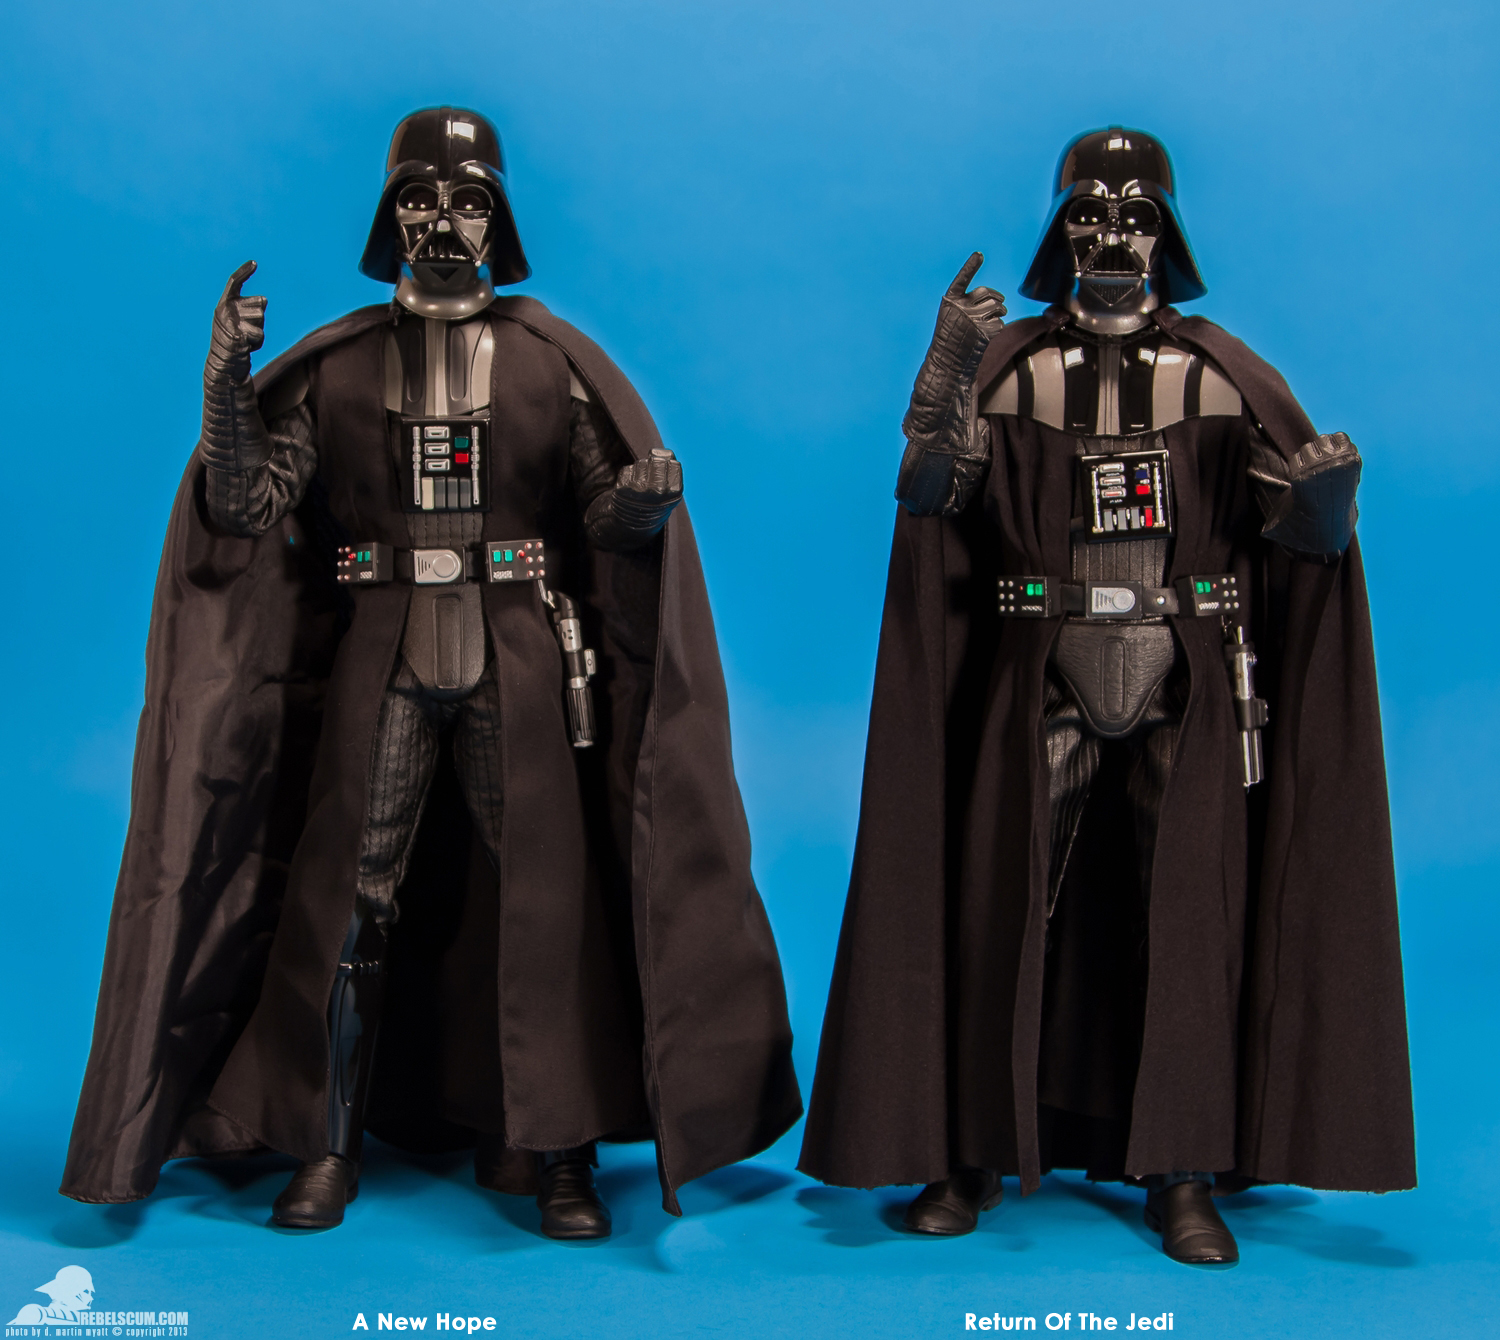 Darth-Vader-Return-Of-The-Jedi-Sixth-Scale-Sideshow-Collectibles-052.jpg